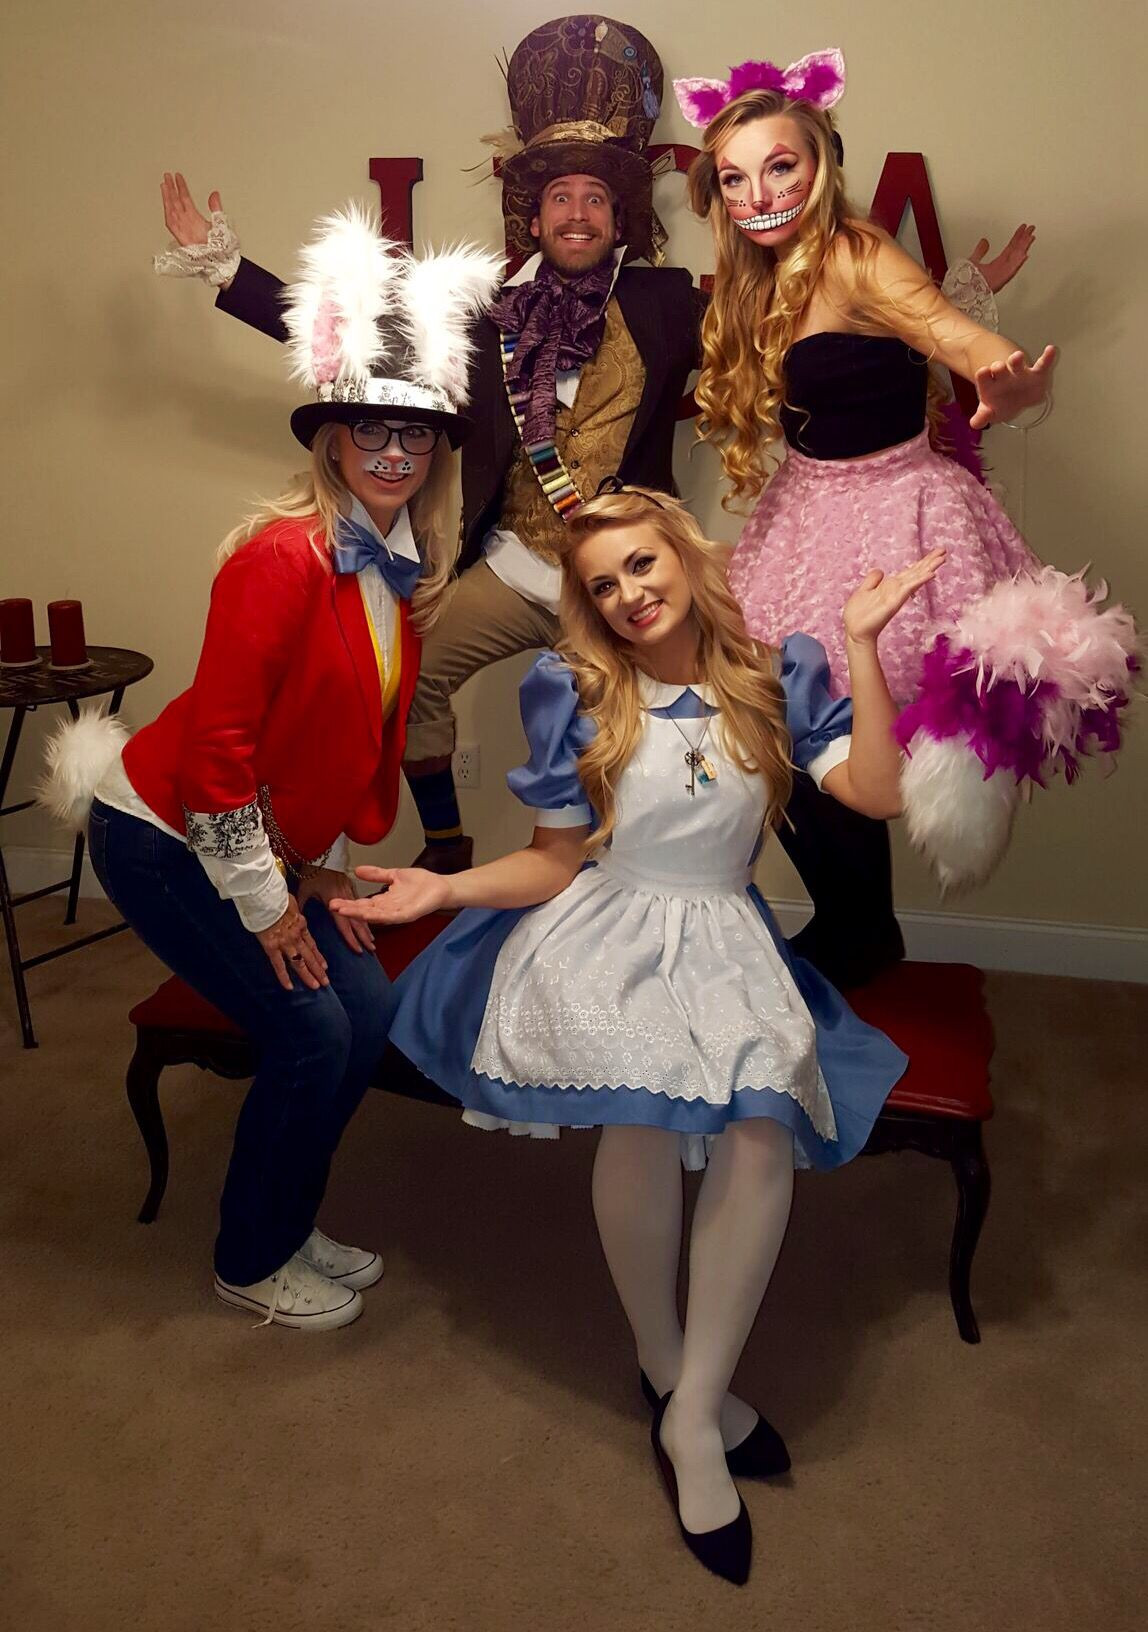 Alice In Wonderland Halloween Party Ideas
 Bunny mad hatter Cheshire Cat and Alice in wonderland